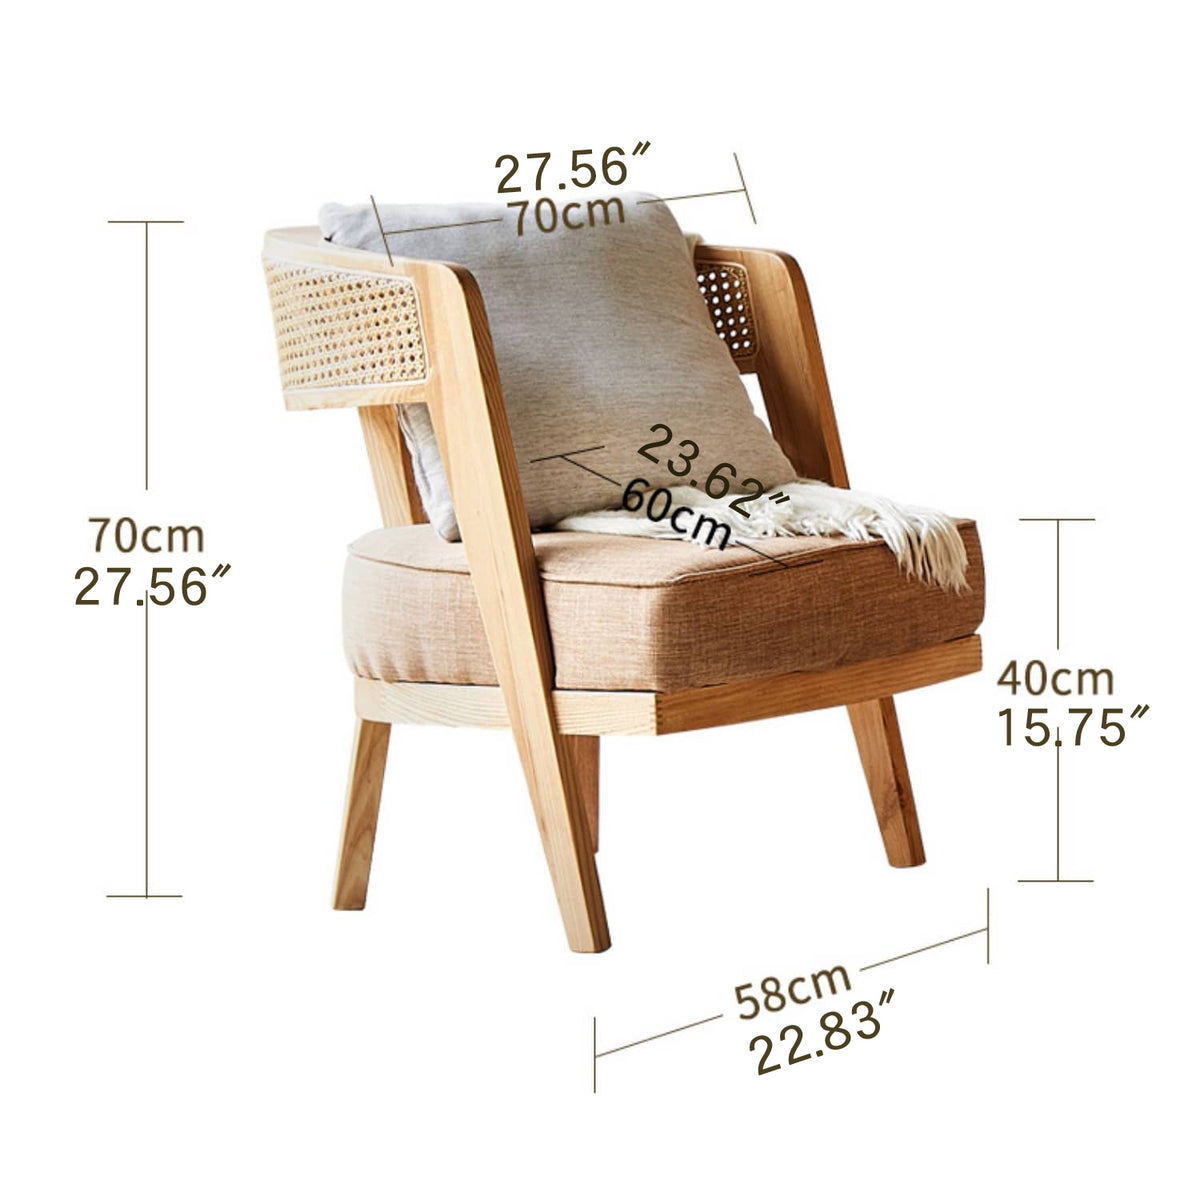 Elegant Ash Wood and Rattan Chair with Cotton-Linen Upholstery htzm-1501